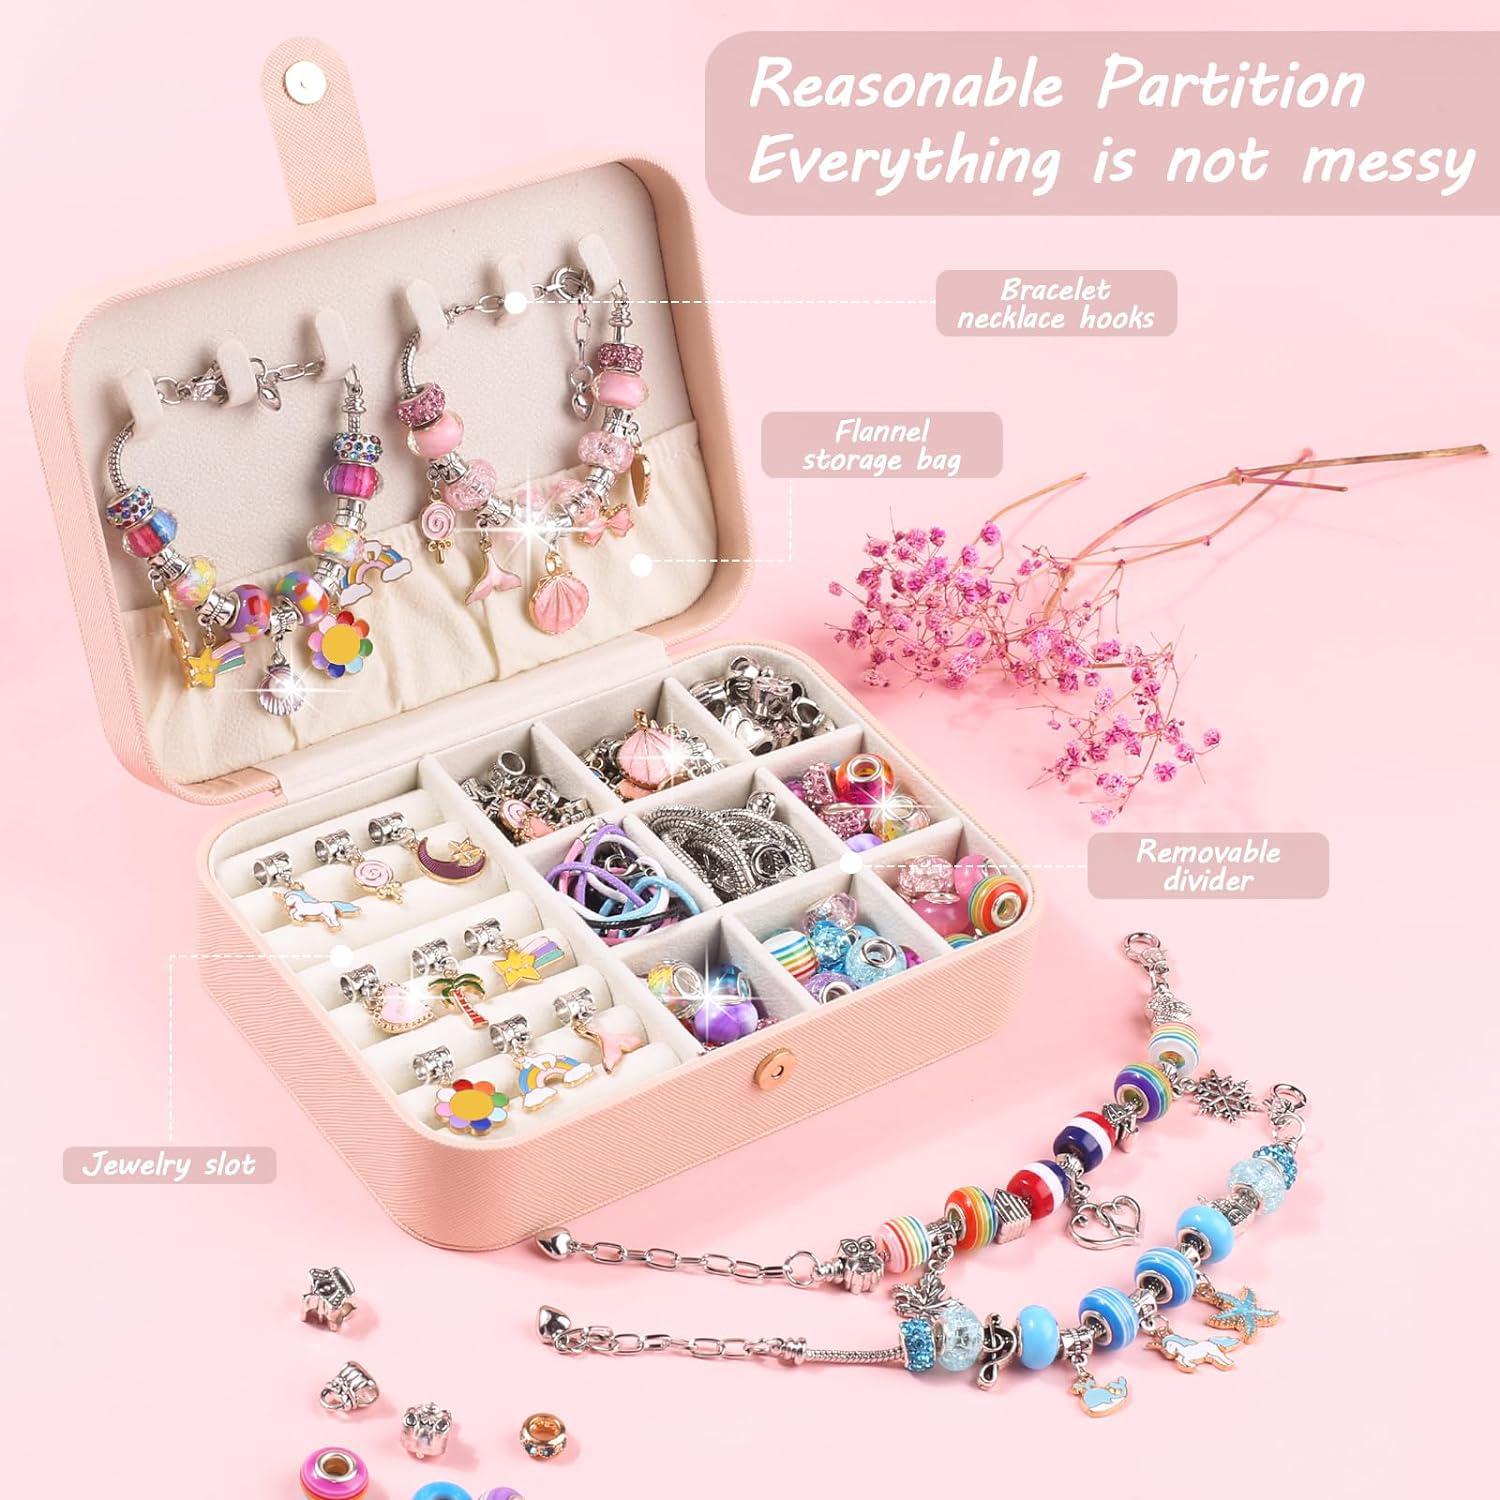 150 PCS Large Charm Bracelet Making Kit Beads for Jewelry Making Unicorn  Mermaid DIY Arts Supplies and Crafts for Girls Ages 8-12 Kids Birthday and  Christmas Gifts for Teenage Girls